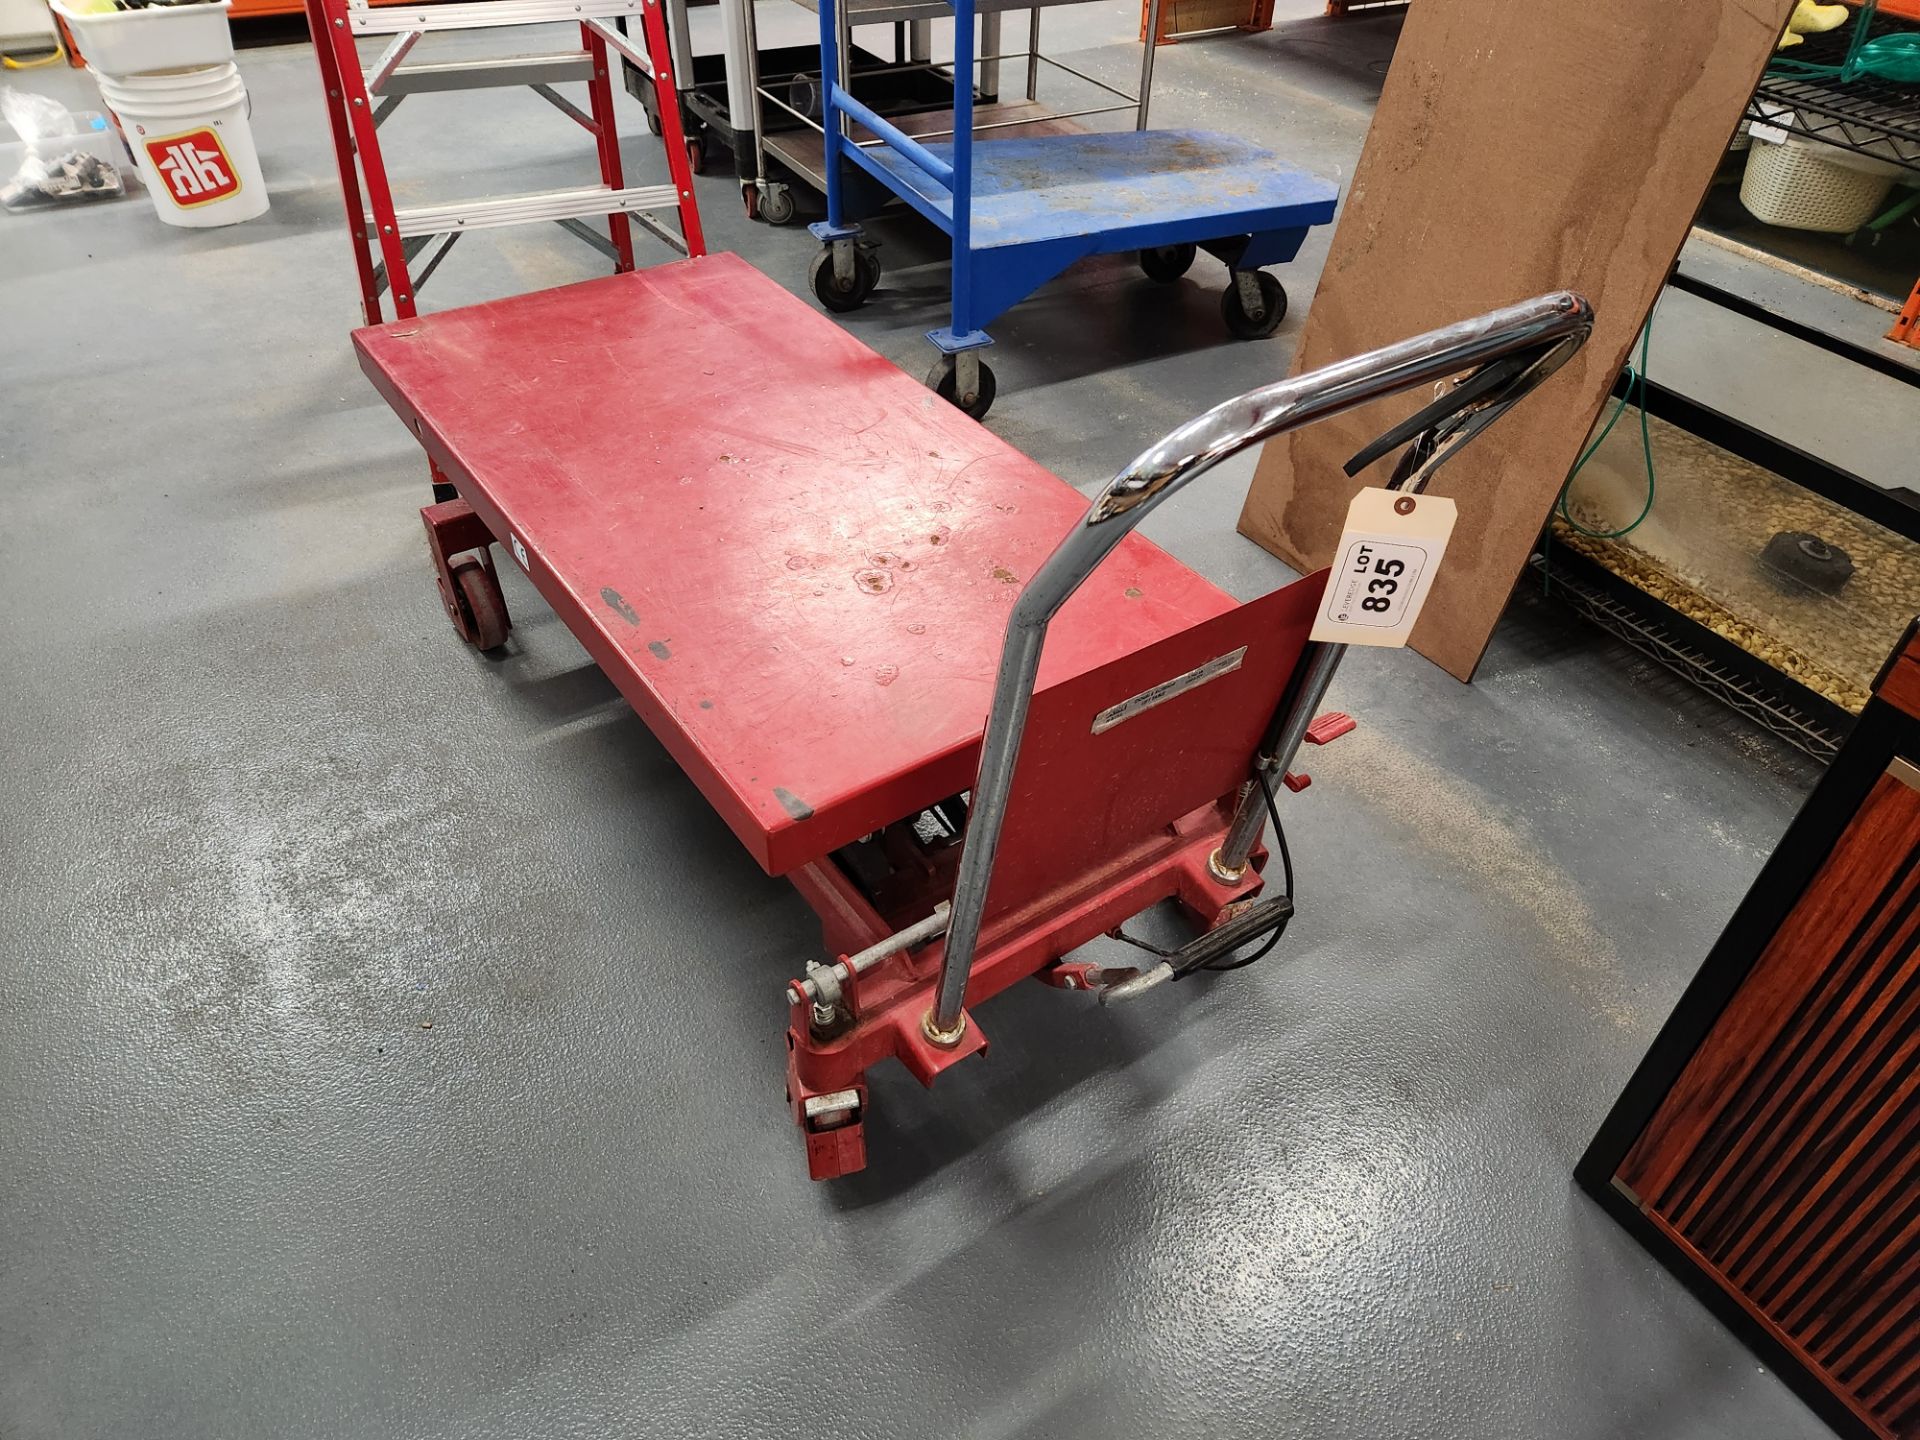 Uline H-8152 Double Scissor Lift Table (Can't be removed until Saturday April 27th)